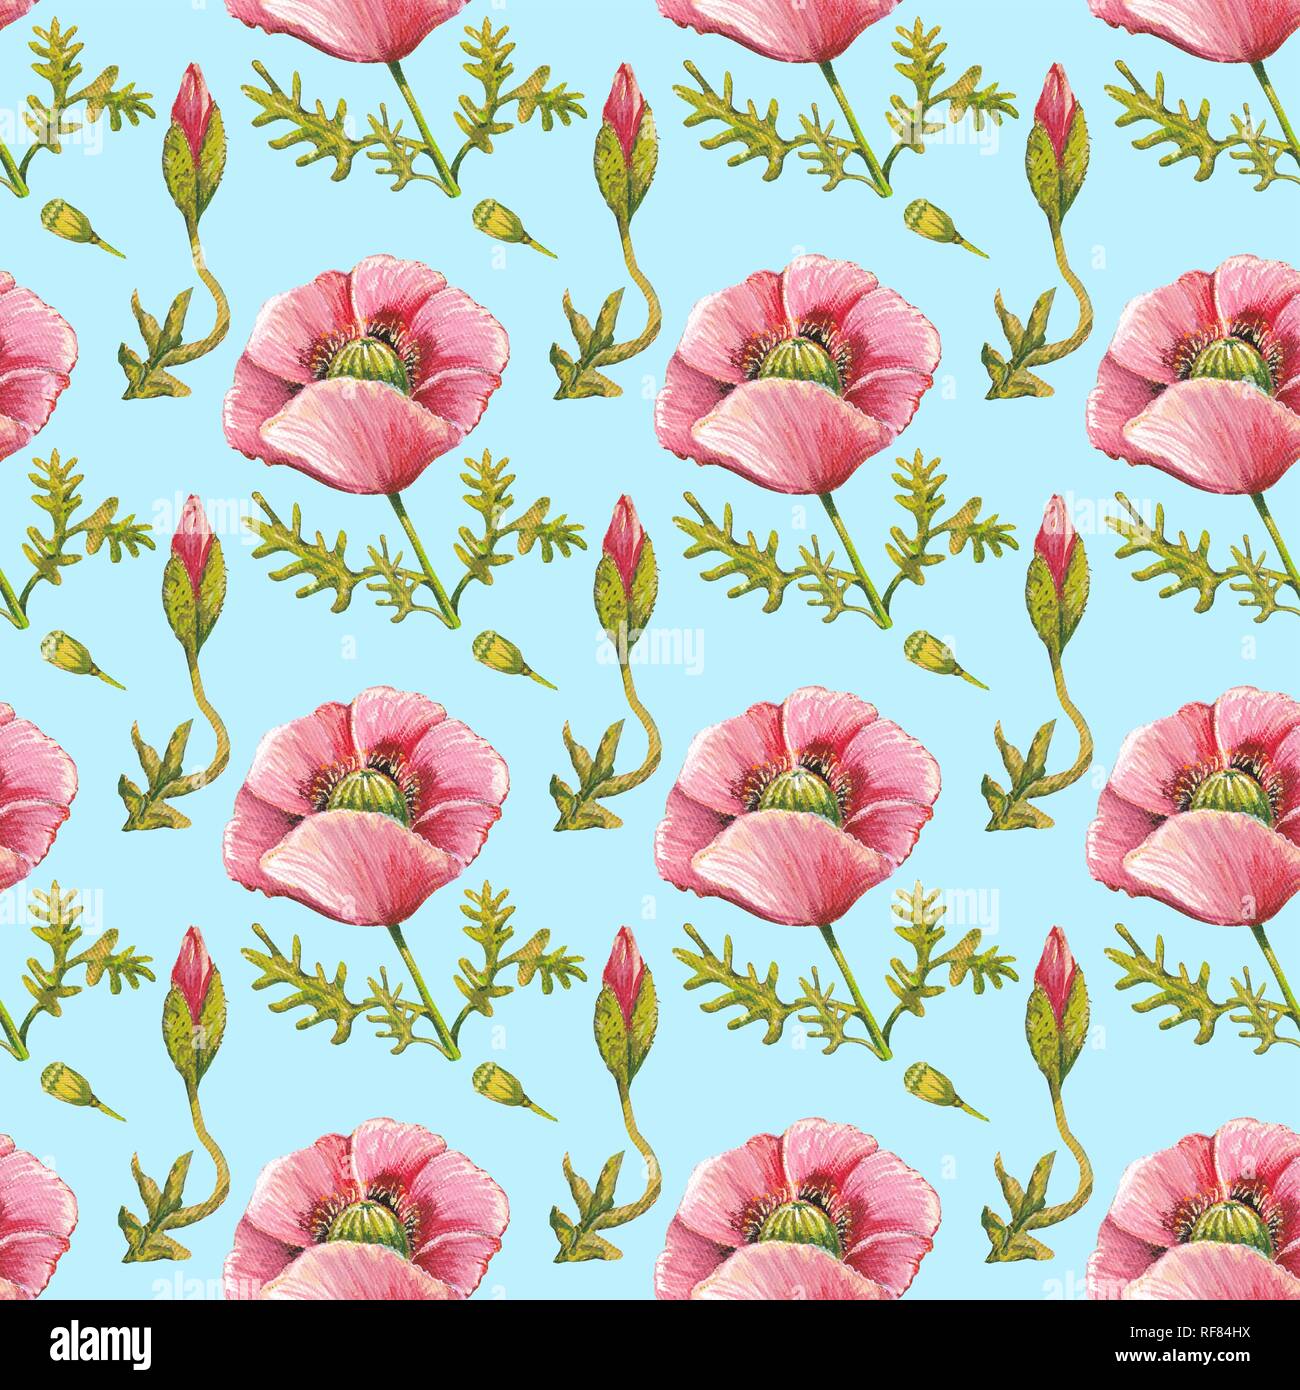 Wallpaper, wrapping paper, seamless pattern, poppies in pink, background blue, Germany Stock Photo